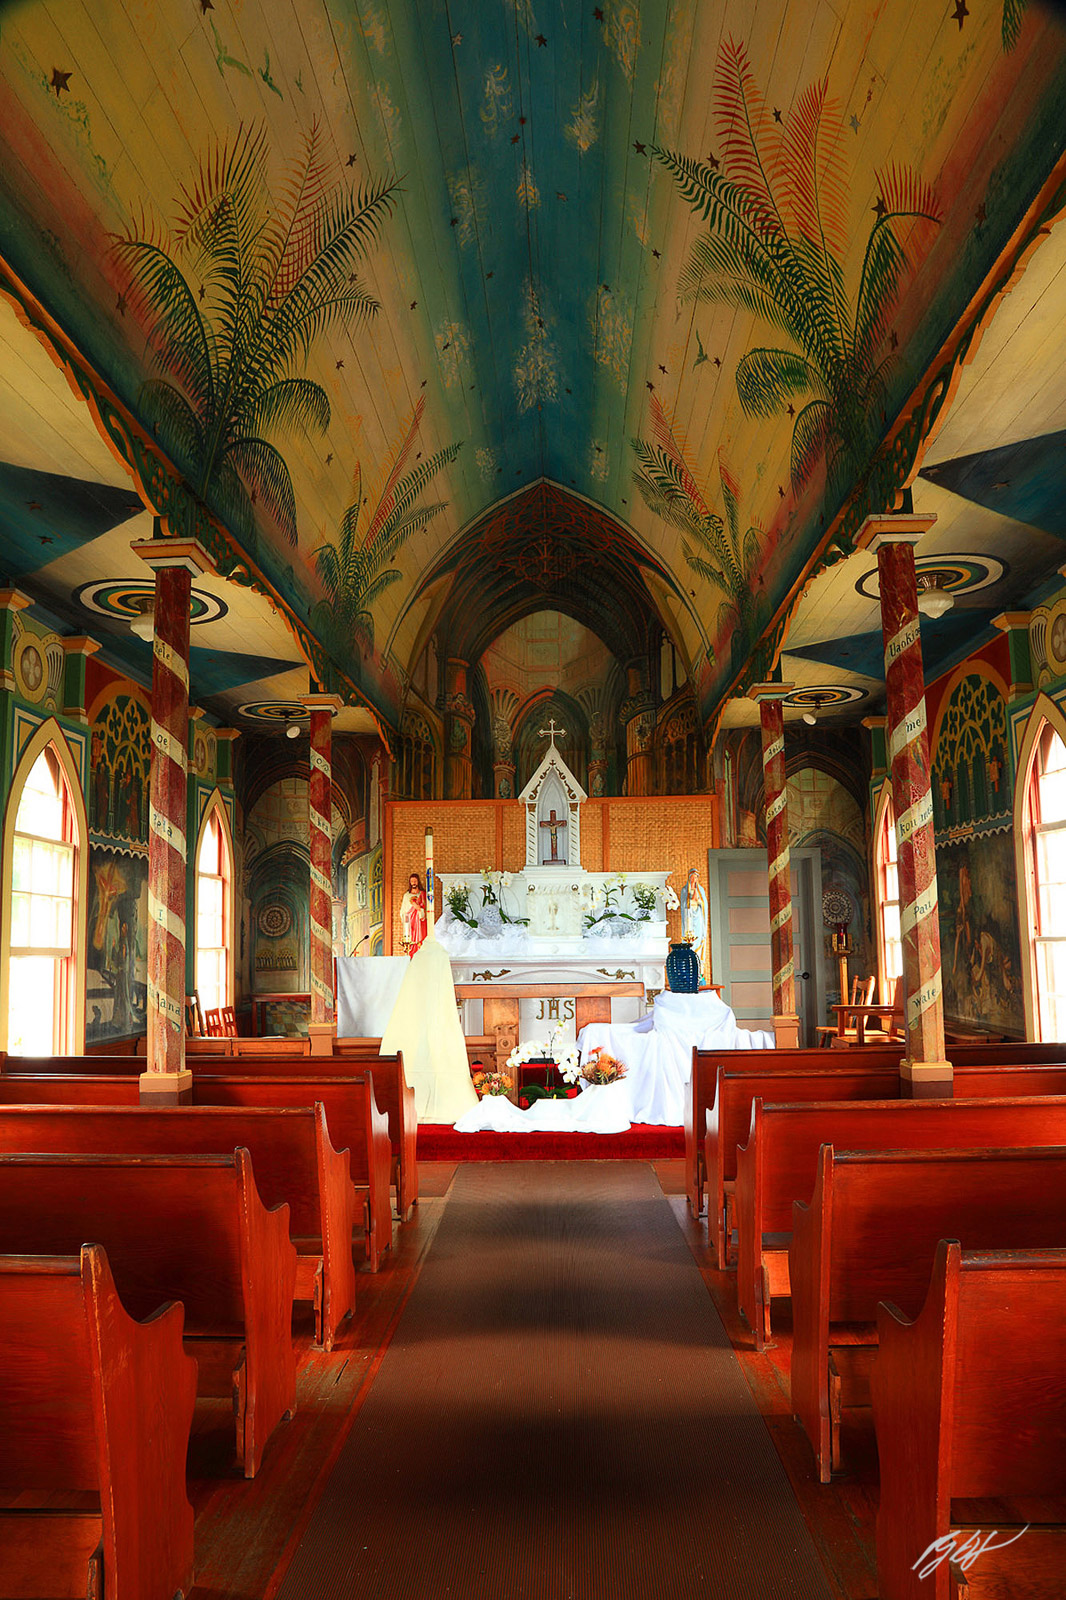 Inside the Painted Chruch from the Big Island of Hawaii